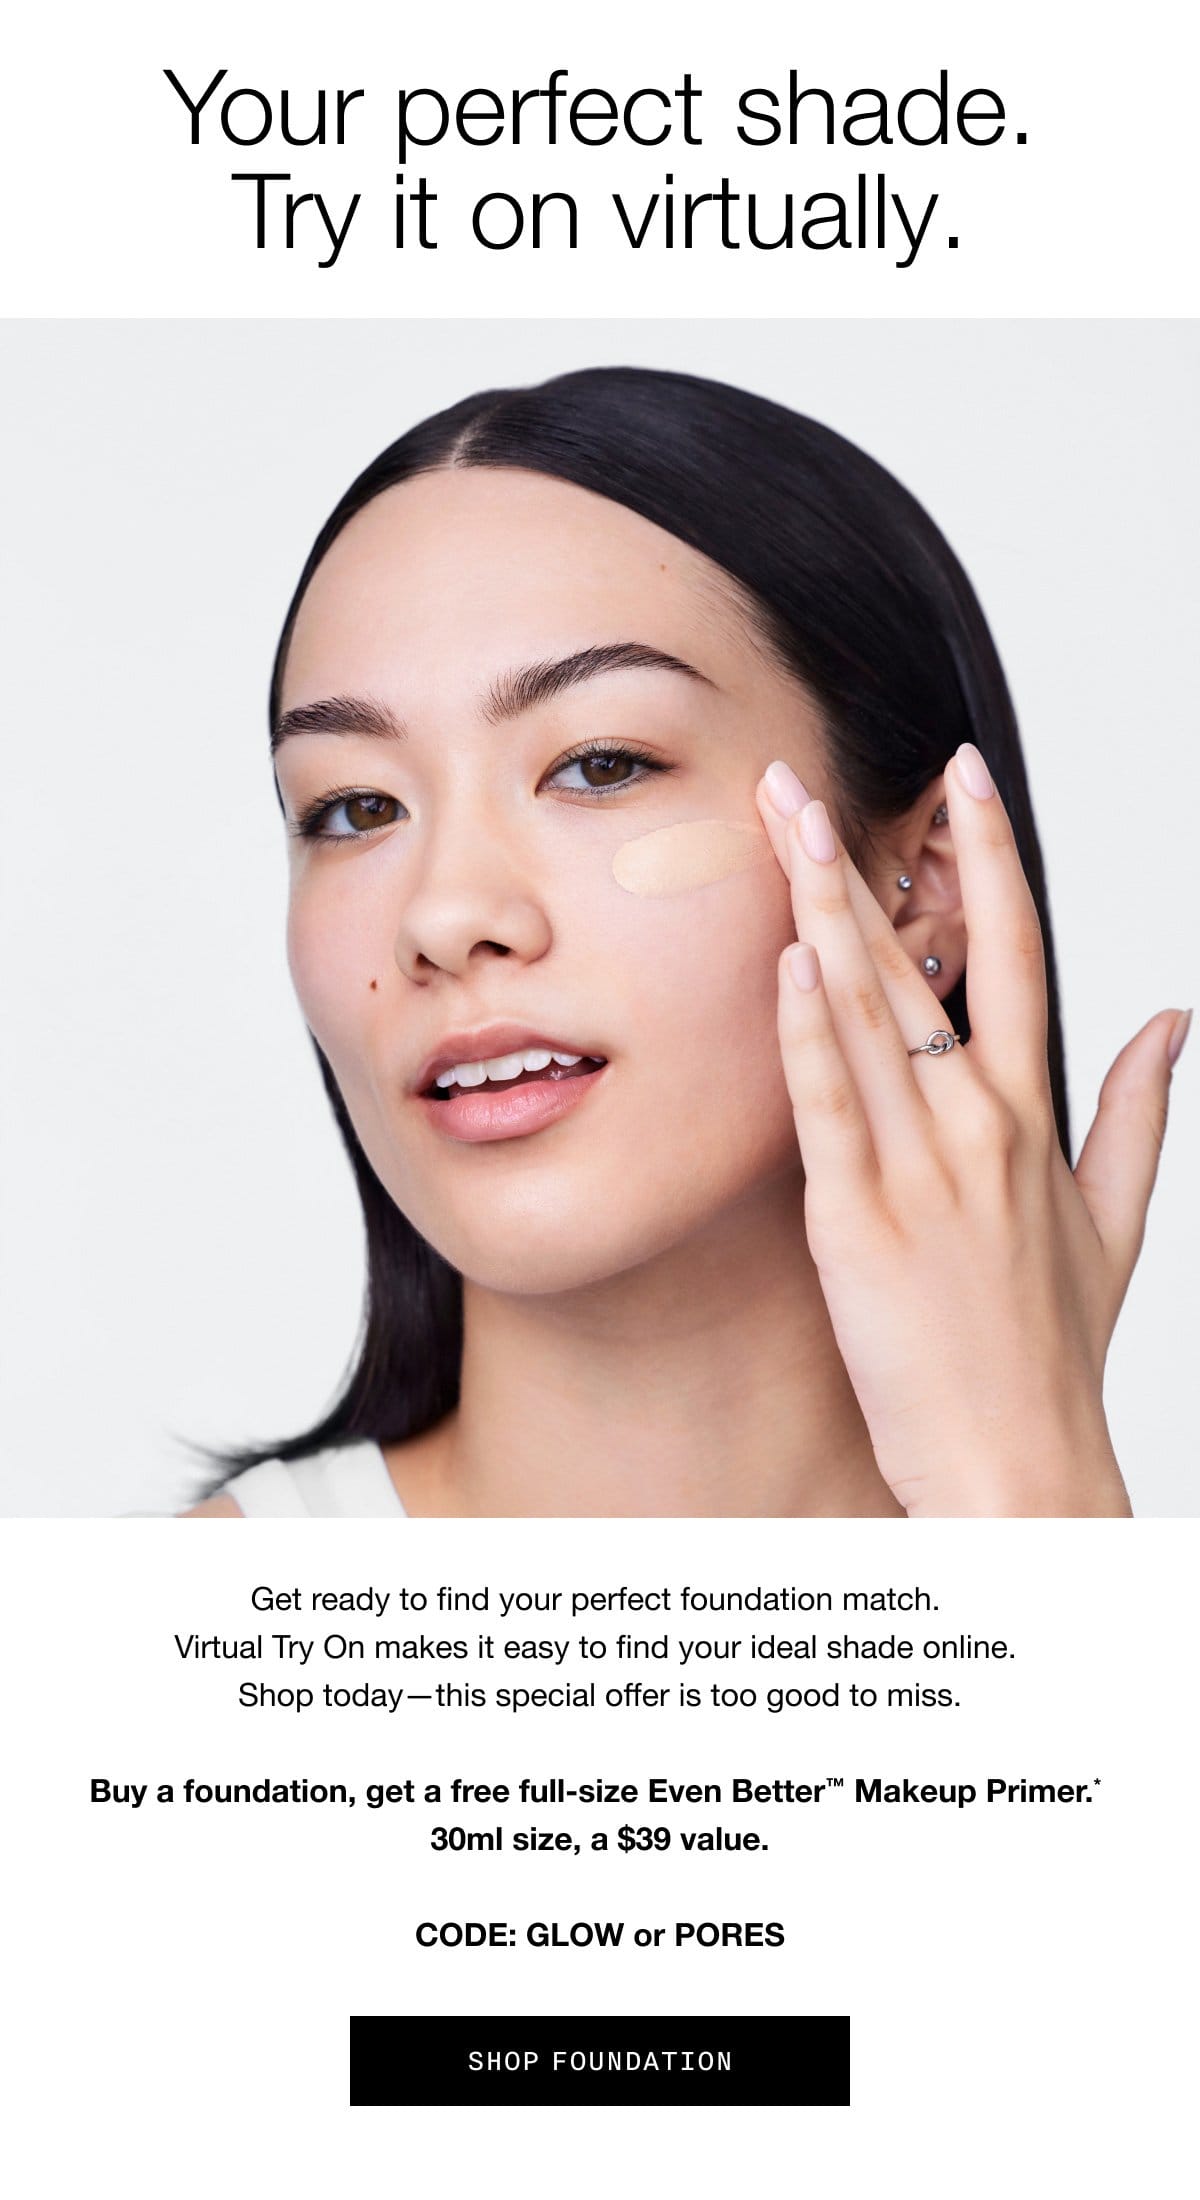 Your perfect shade. Try it on virtually. Get ready to find your perfect foundation match. Virtual Try On makes it easy to find your ideal shade online. Shop today - this special offer is too good to miss. Buy a foundation, get a free full-size Even Better™ Makeup Primer.* 30ml size, a \\$39 value. CODE: GLOW or PORES | SHOP FOUNDATION